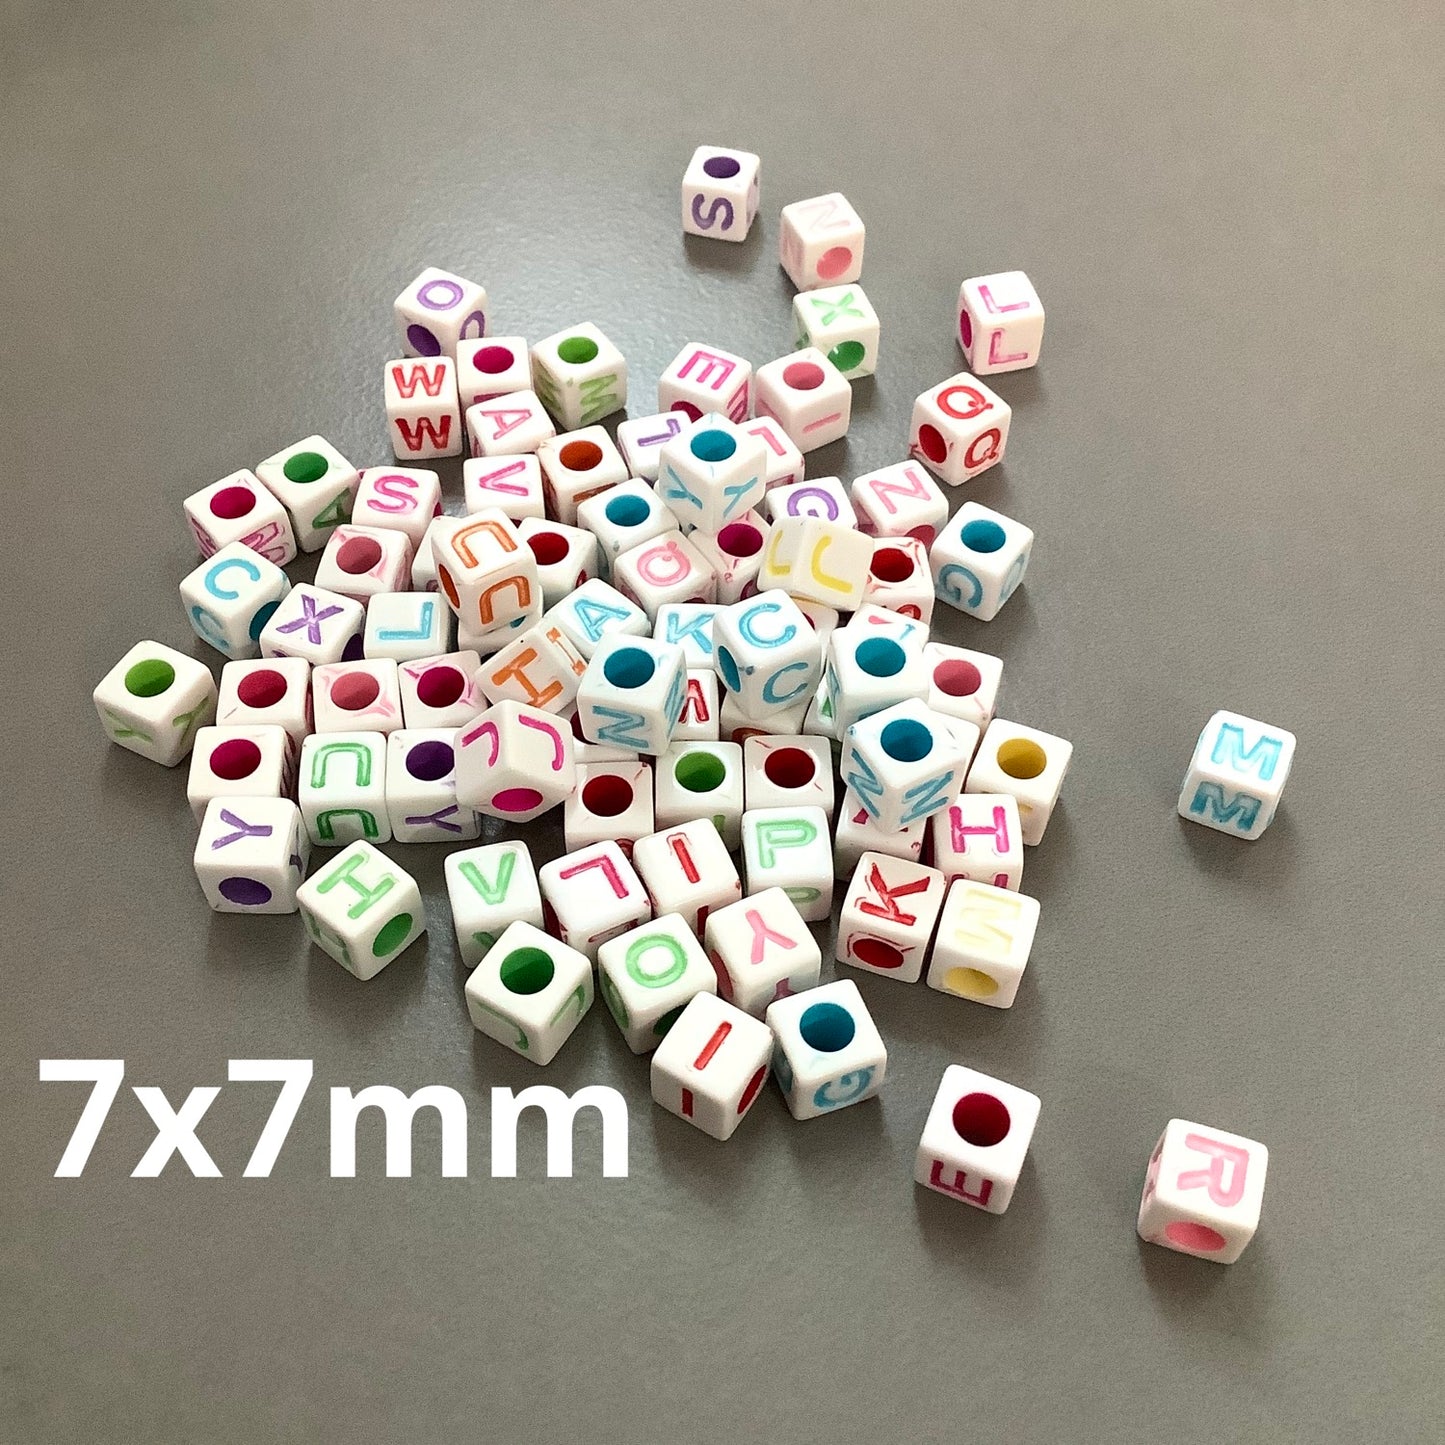 Ac Cube Letter’s - 23326/23327 approx 195 pieces